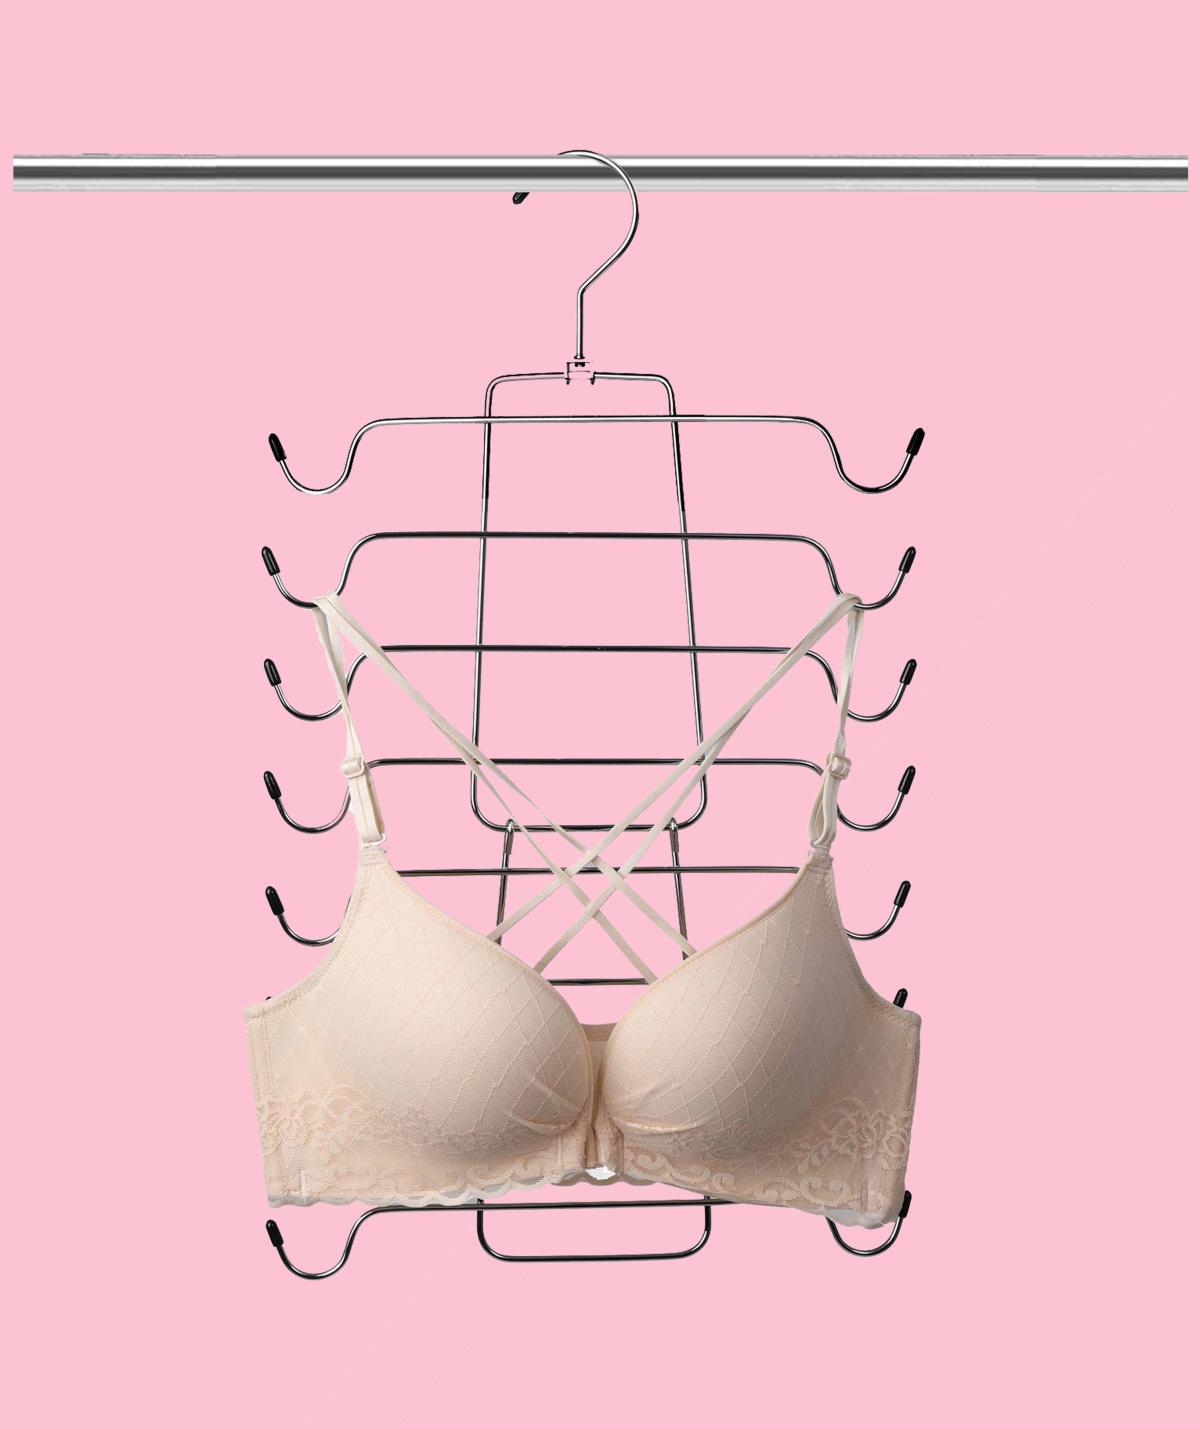 This $7 Bra Hanger Is the Secret to Freeing Up Your Drawers